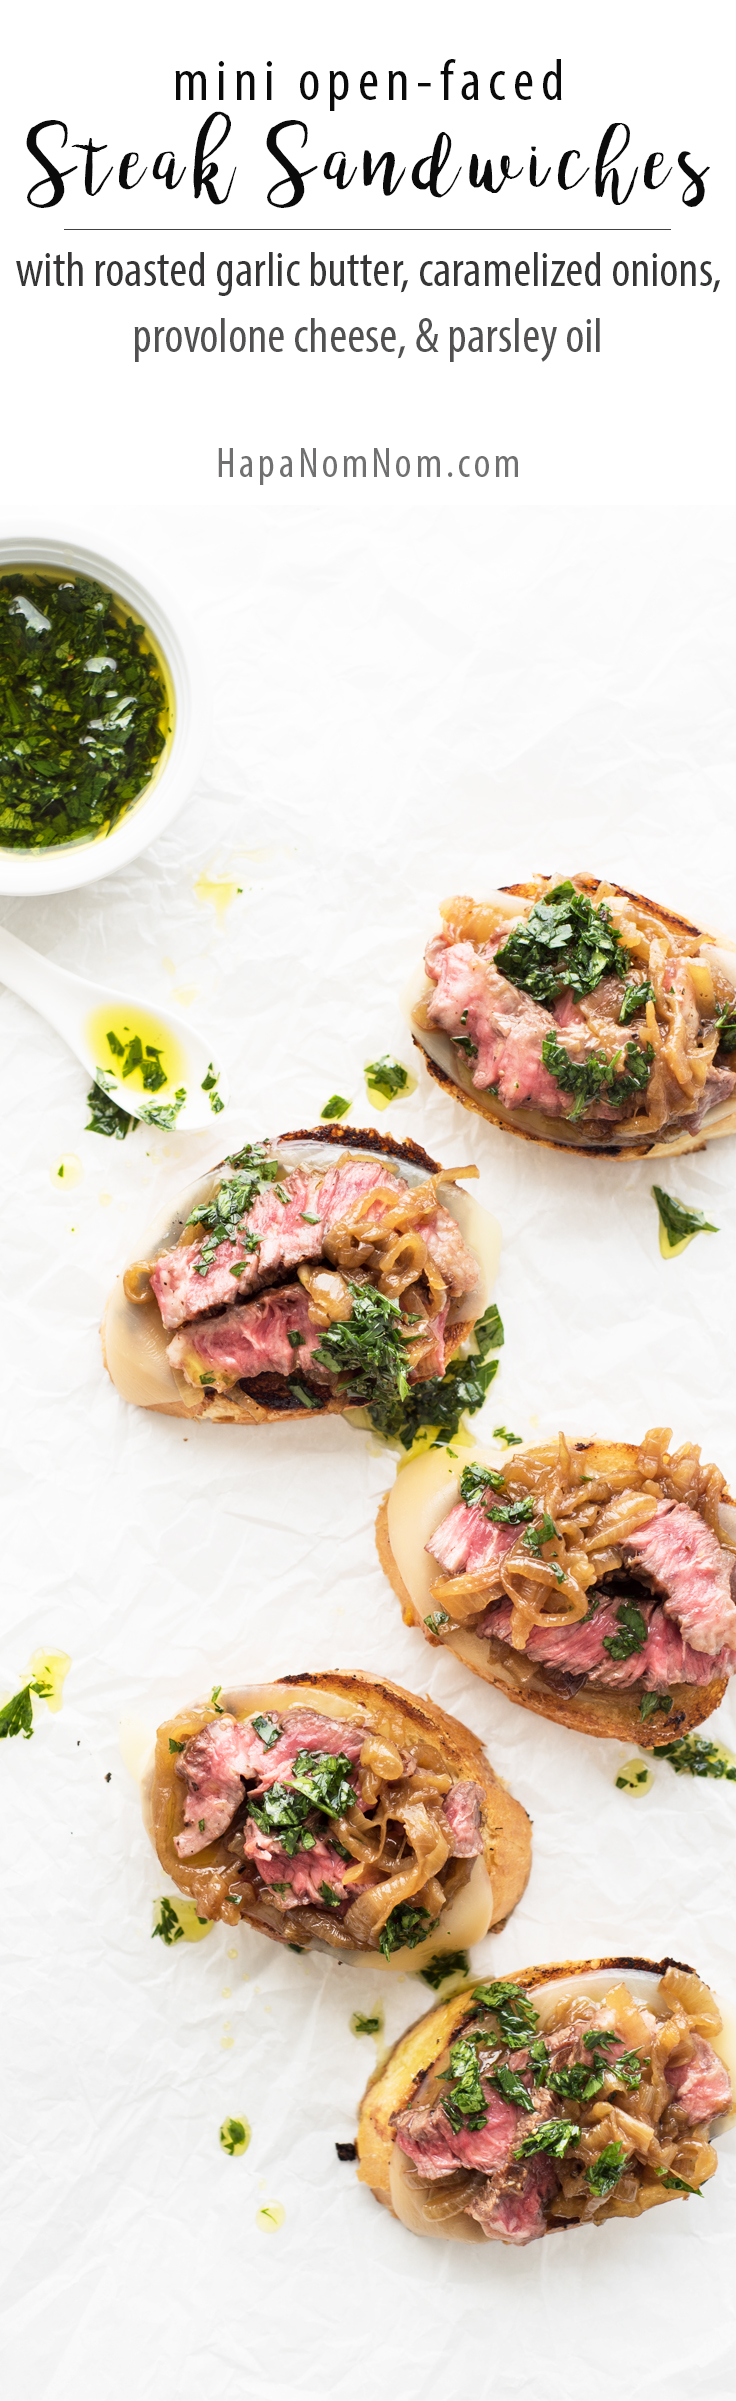 Prepare your taste buds for these incredible steak sandwiches! Tender, juicy steak on crusty garlic bread, with aged provolone cheese, rich caramelized onions, and a drizzle of parsley oil. 